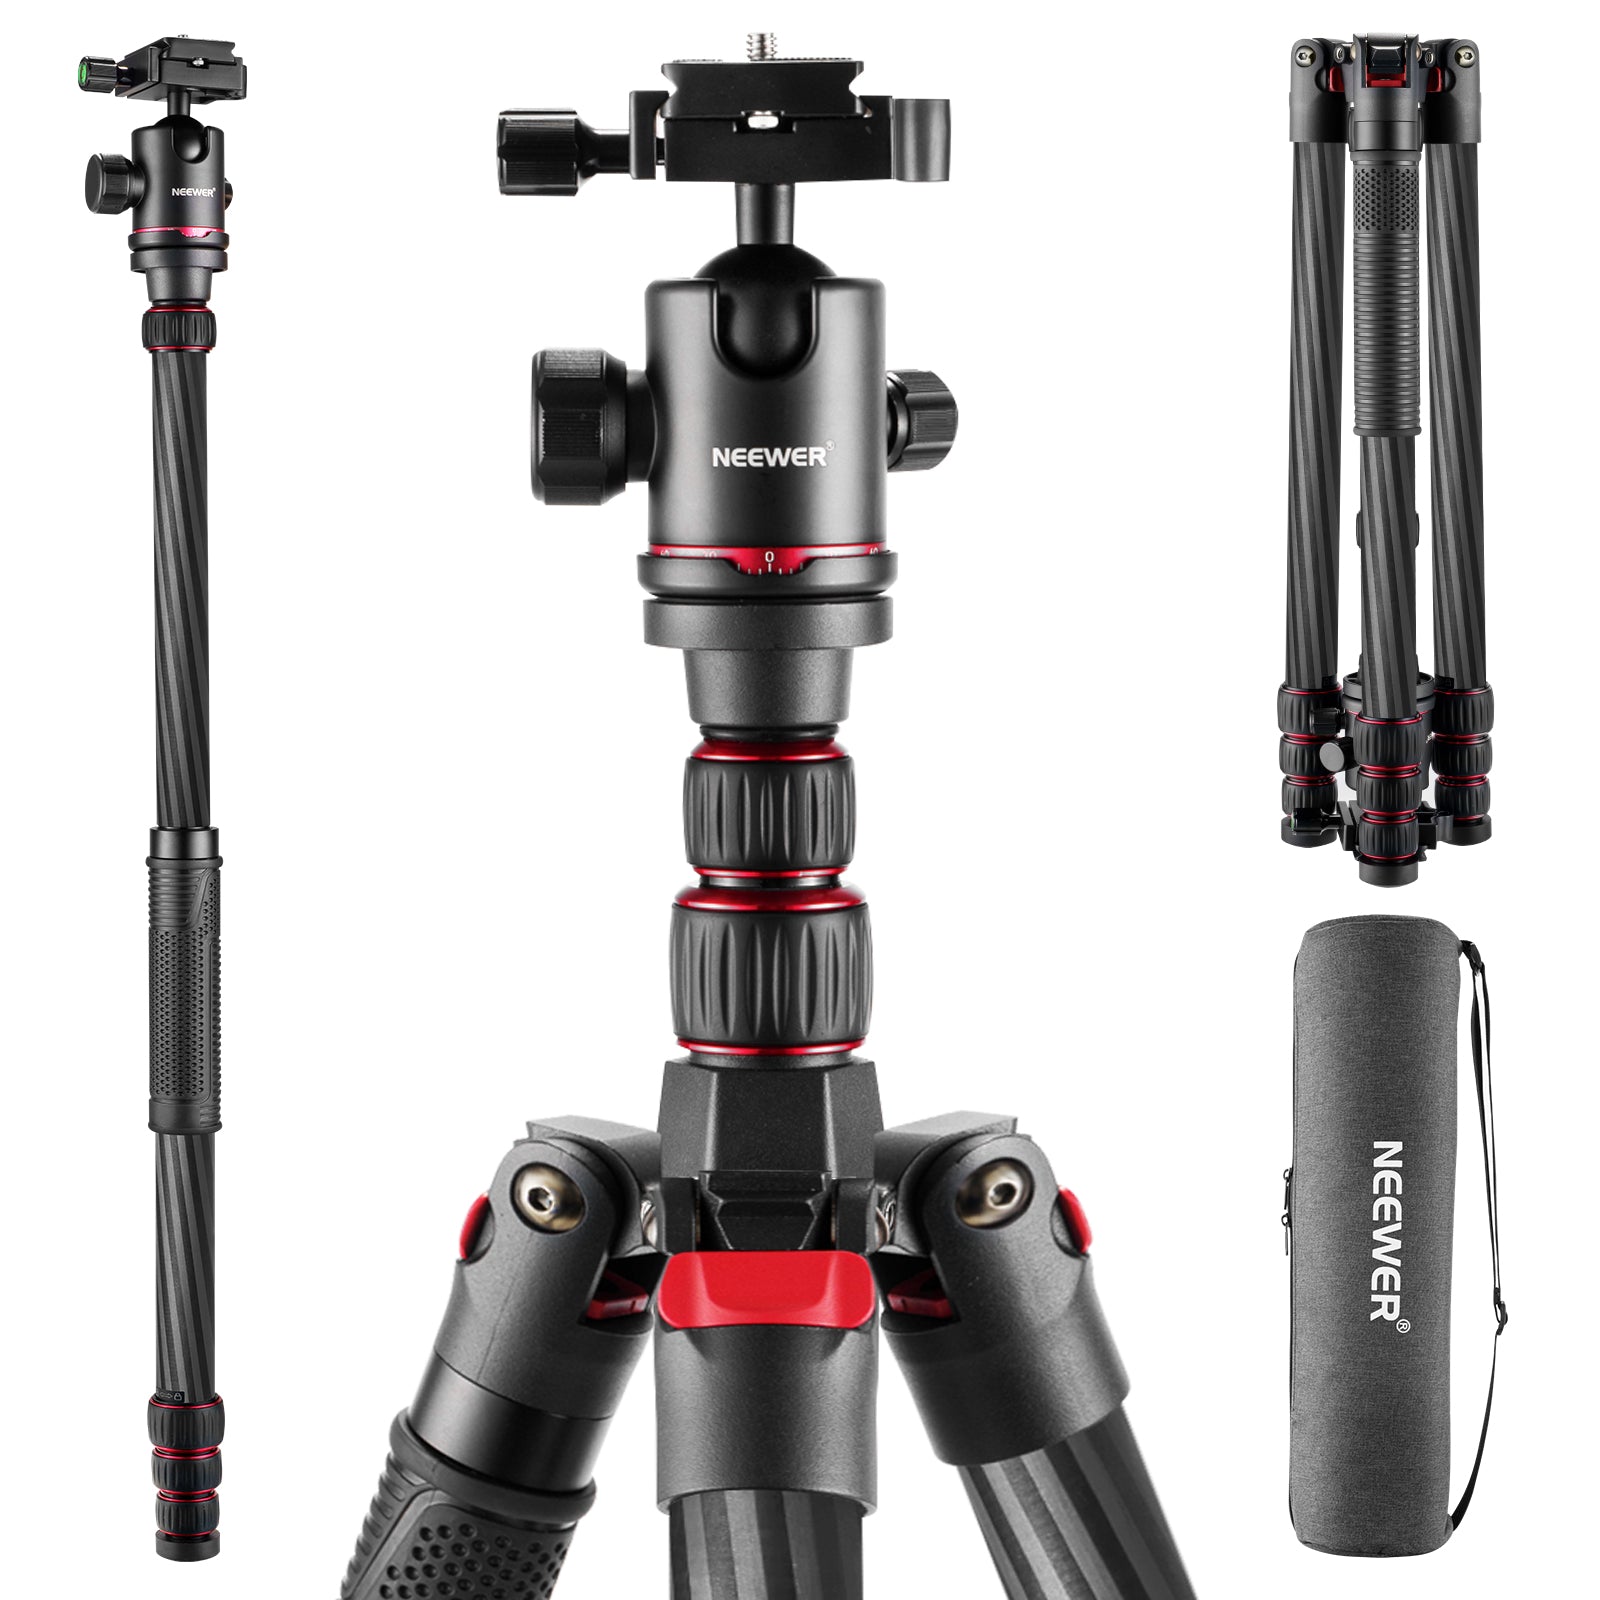 NEEWER N55CR Carbon Fiber Tripod with 2 Section Center Axes - NEEWER